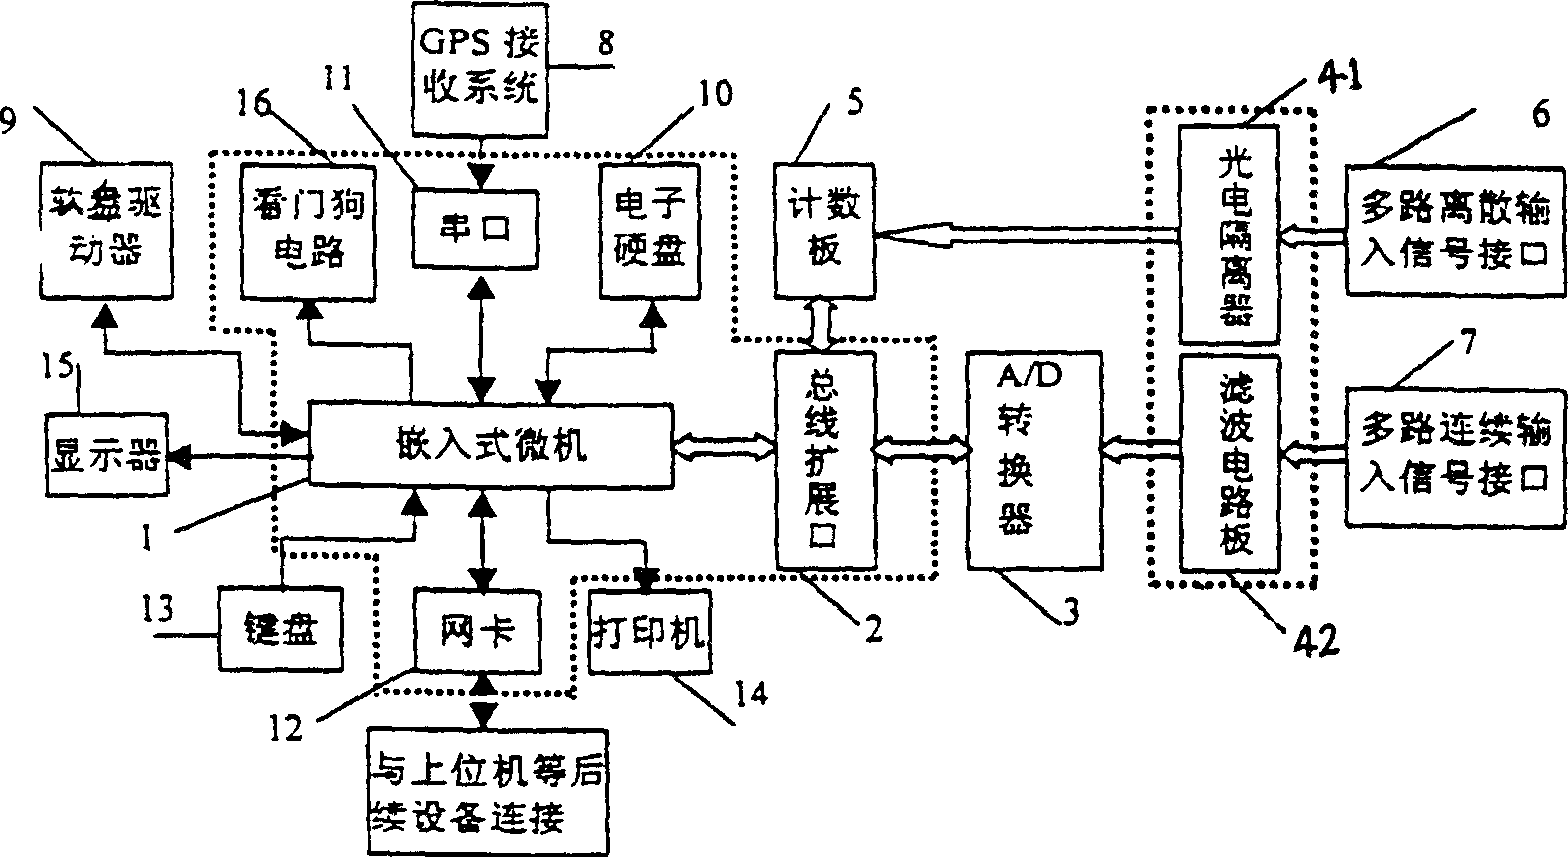 High-speed real time data sampling device